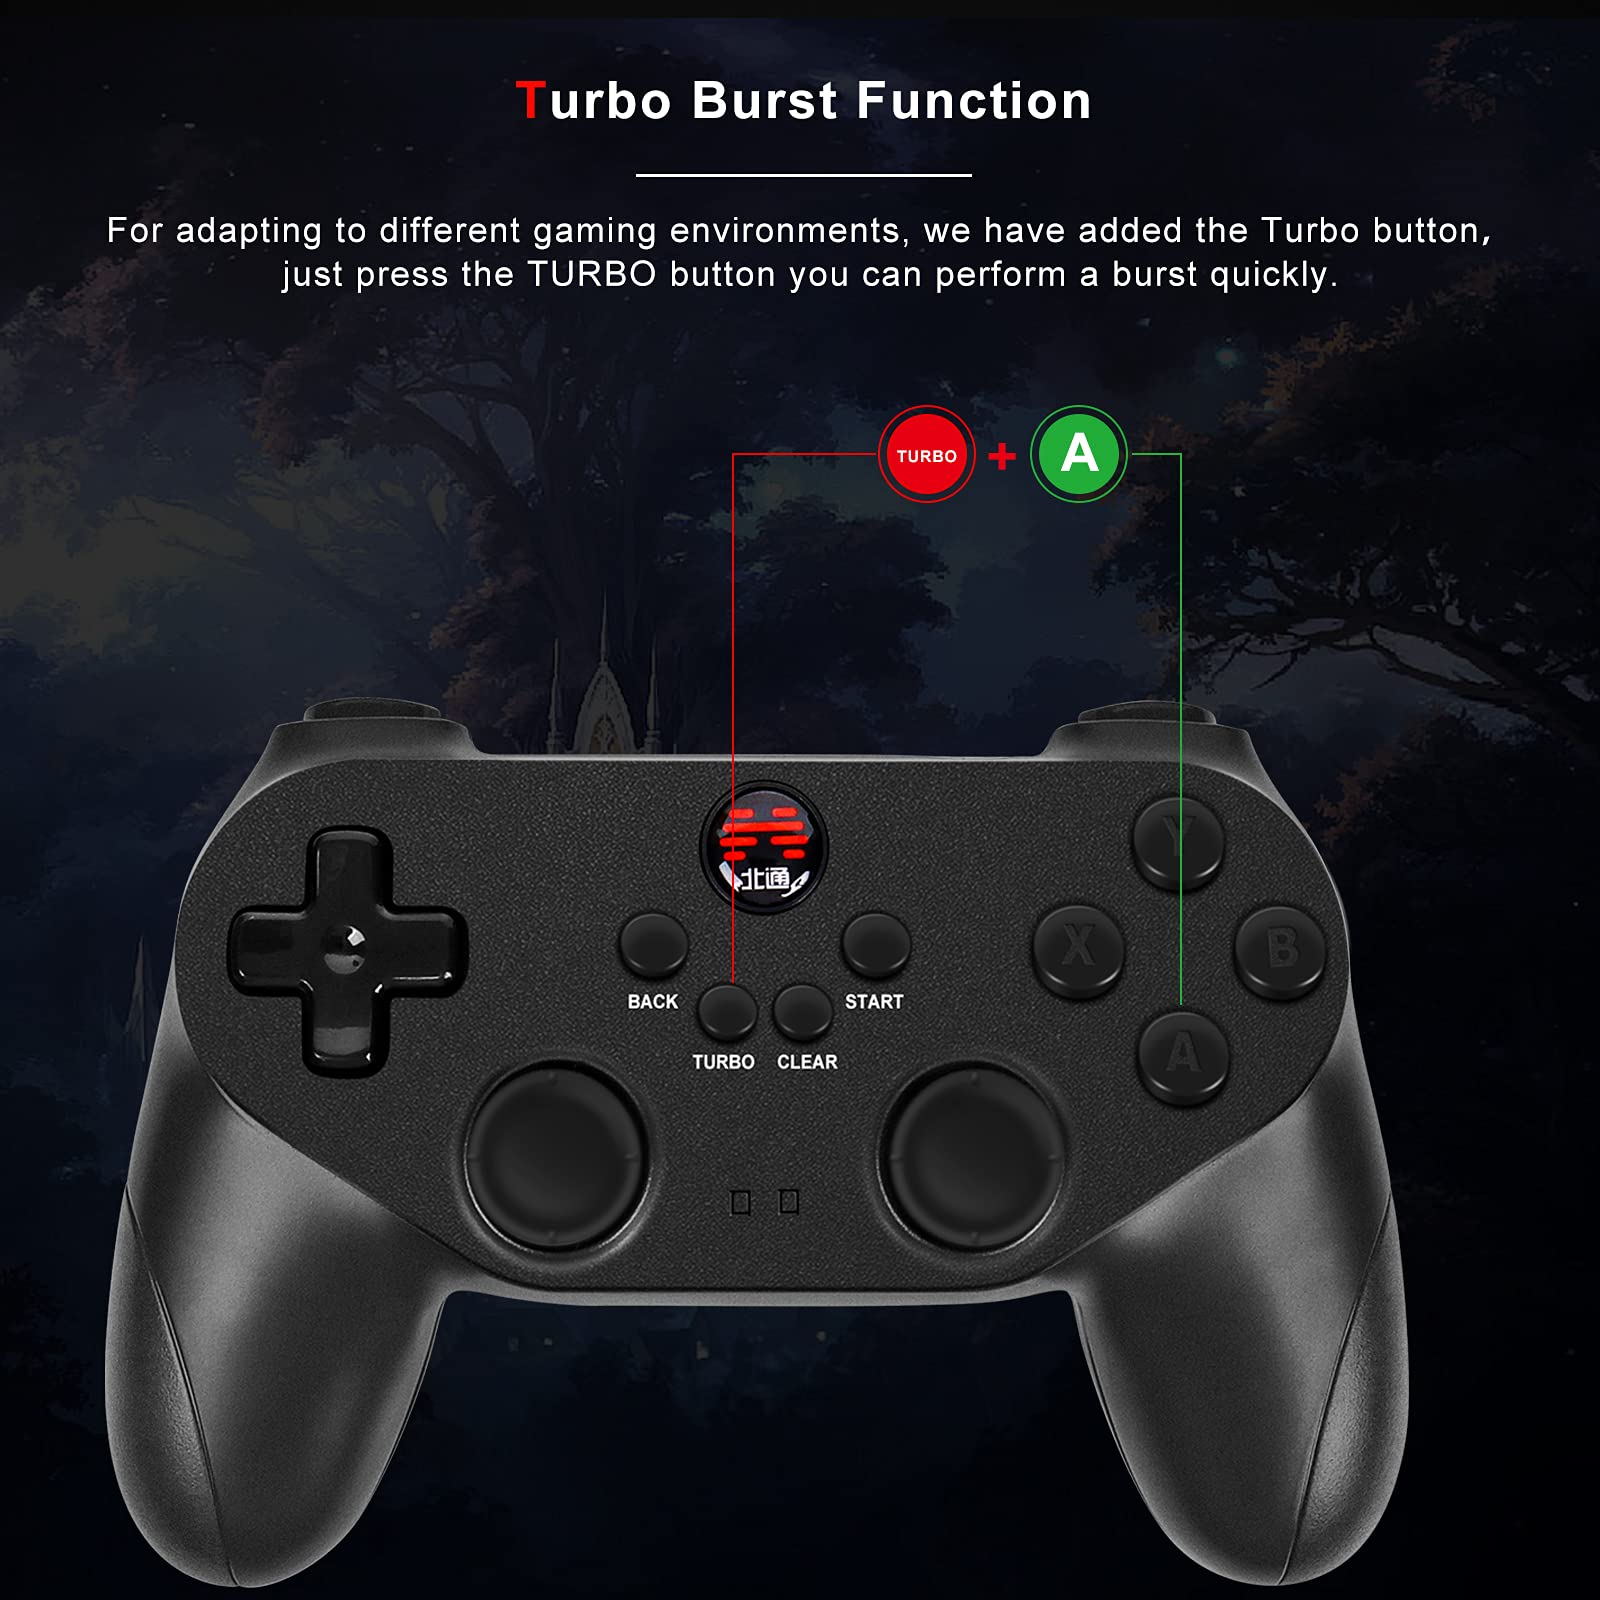 BEITONG Wireless Game Controller with Dual-Vibration Turbo Button Multi-platform PC Gaming Controller for PS3, TV, Windows 7, Switch,TV Box Compatible with Steam & Android Smart TV, Plug and Play